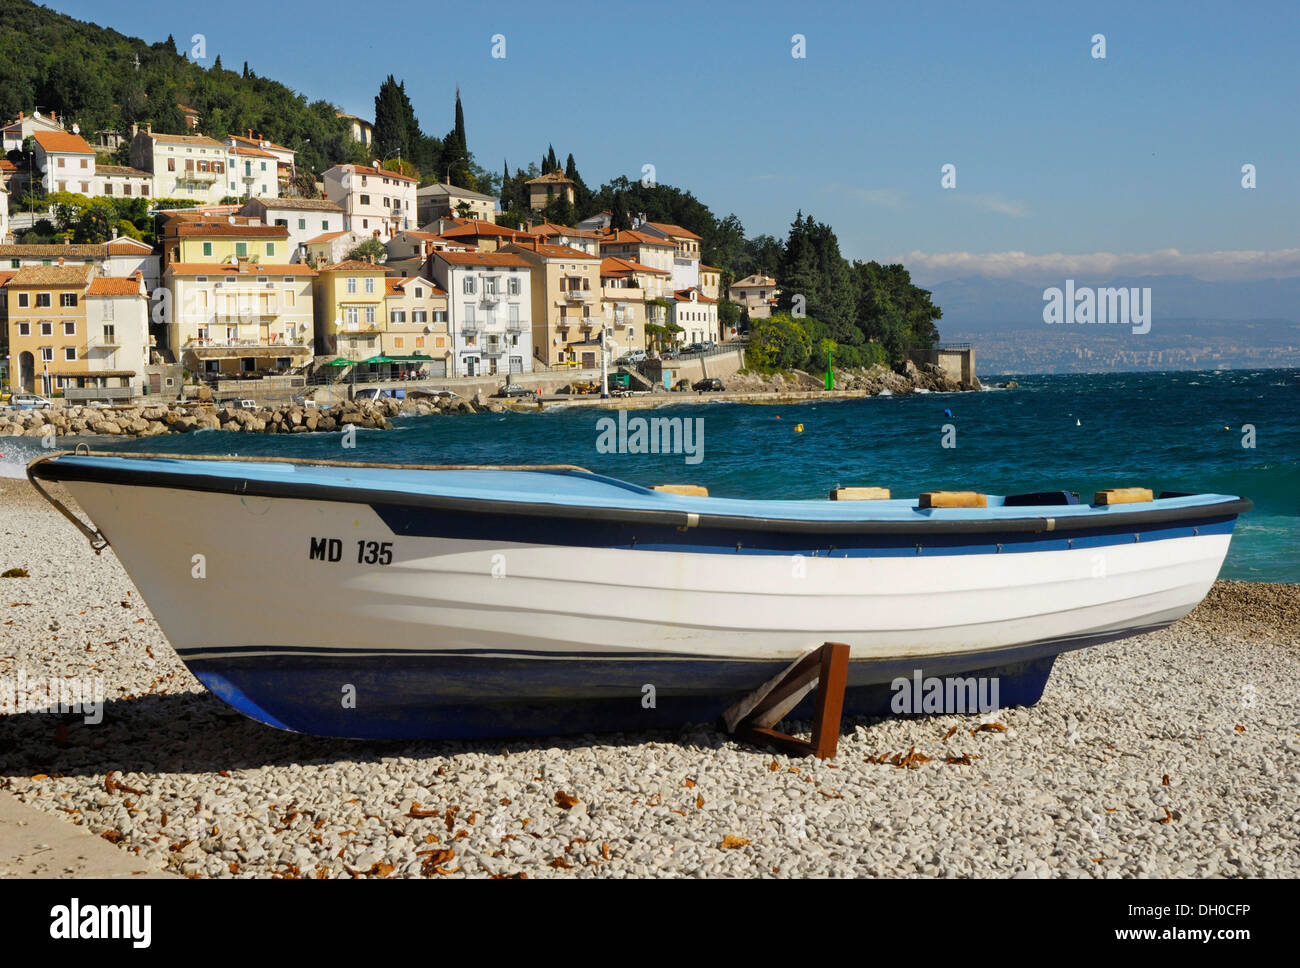 Fishing port in the Kvarner Gulf with a fishing boat on a pebble beach on the Croatian Adriatic coast, Moscenicka Draga Stock Photo